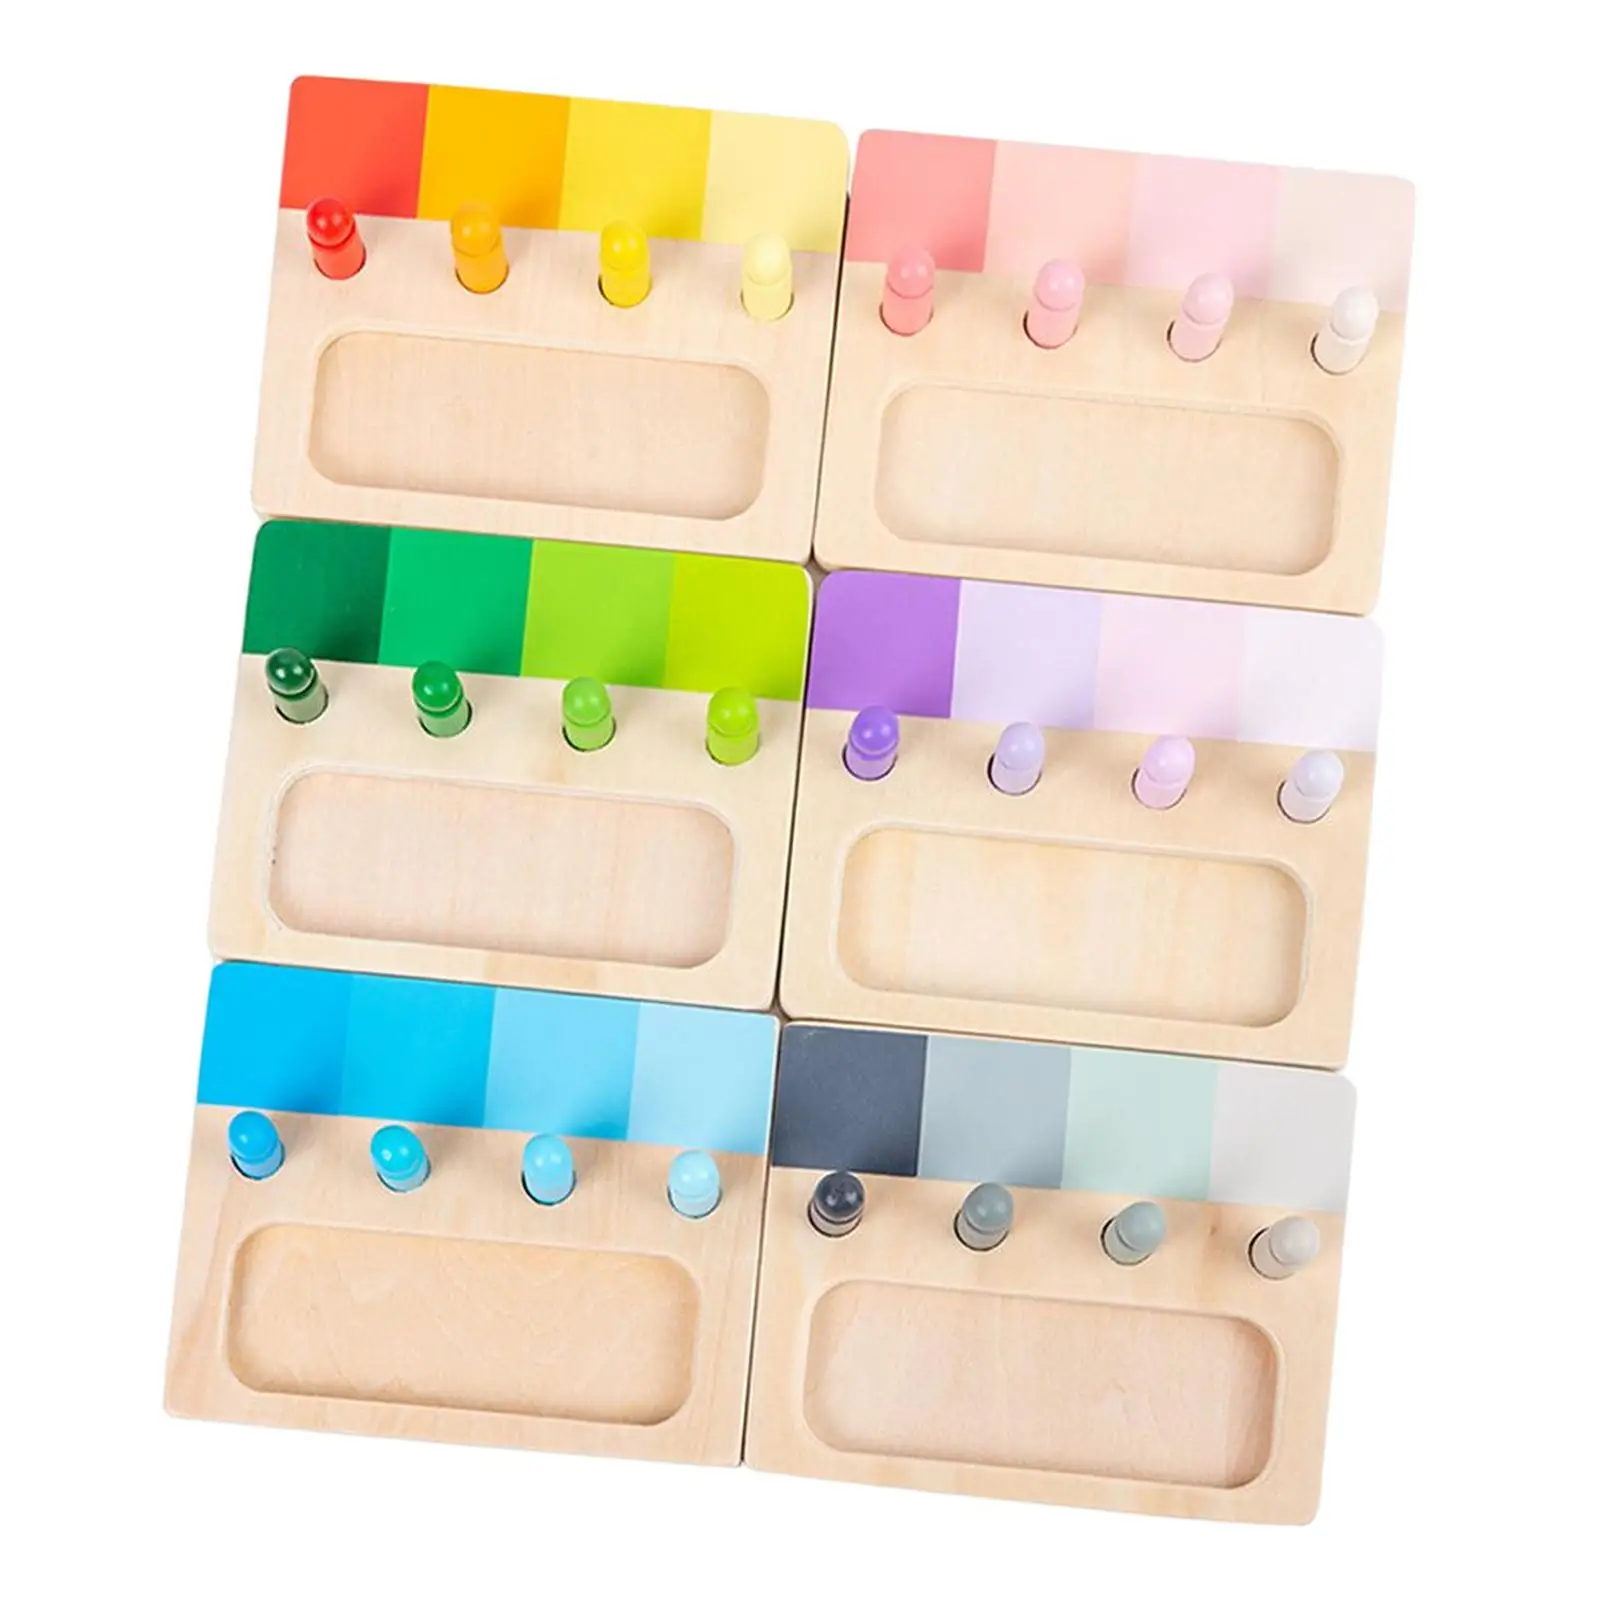 6 Pieces Educational Color Matching Toy Devlopment Toy Wood Color palette for Game